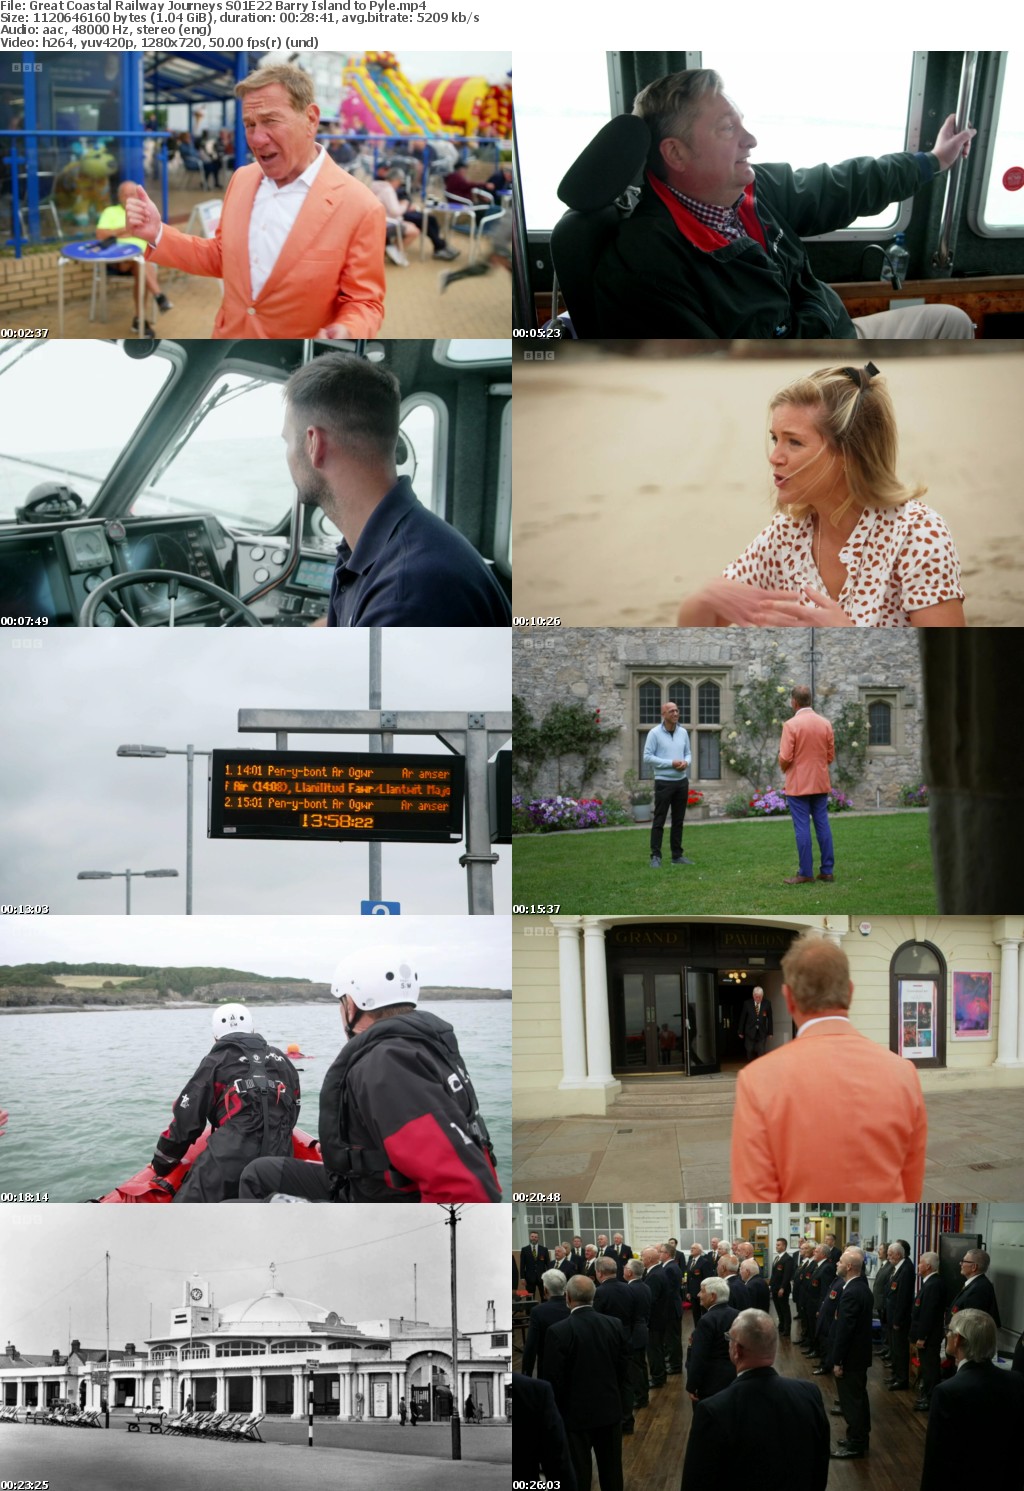 Great Coastal Railway Journeys S01E22 Barry Island to Pyle (1280x720p HD, 50fps, soft Eng subs)